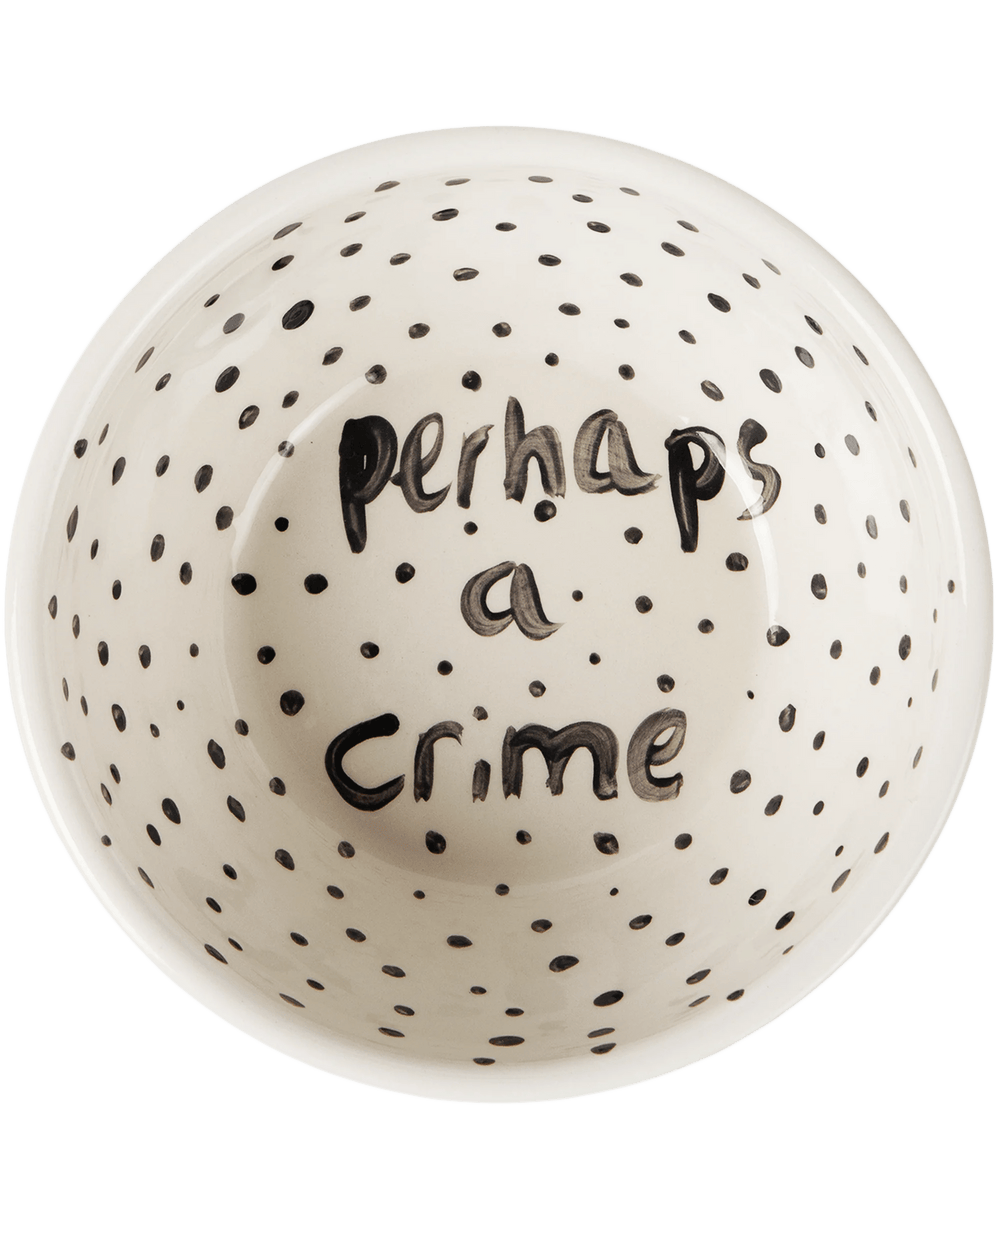 "Perhaps a Crime" Hand Painted Bowl 8/12